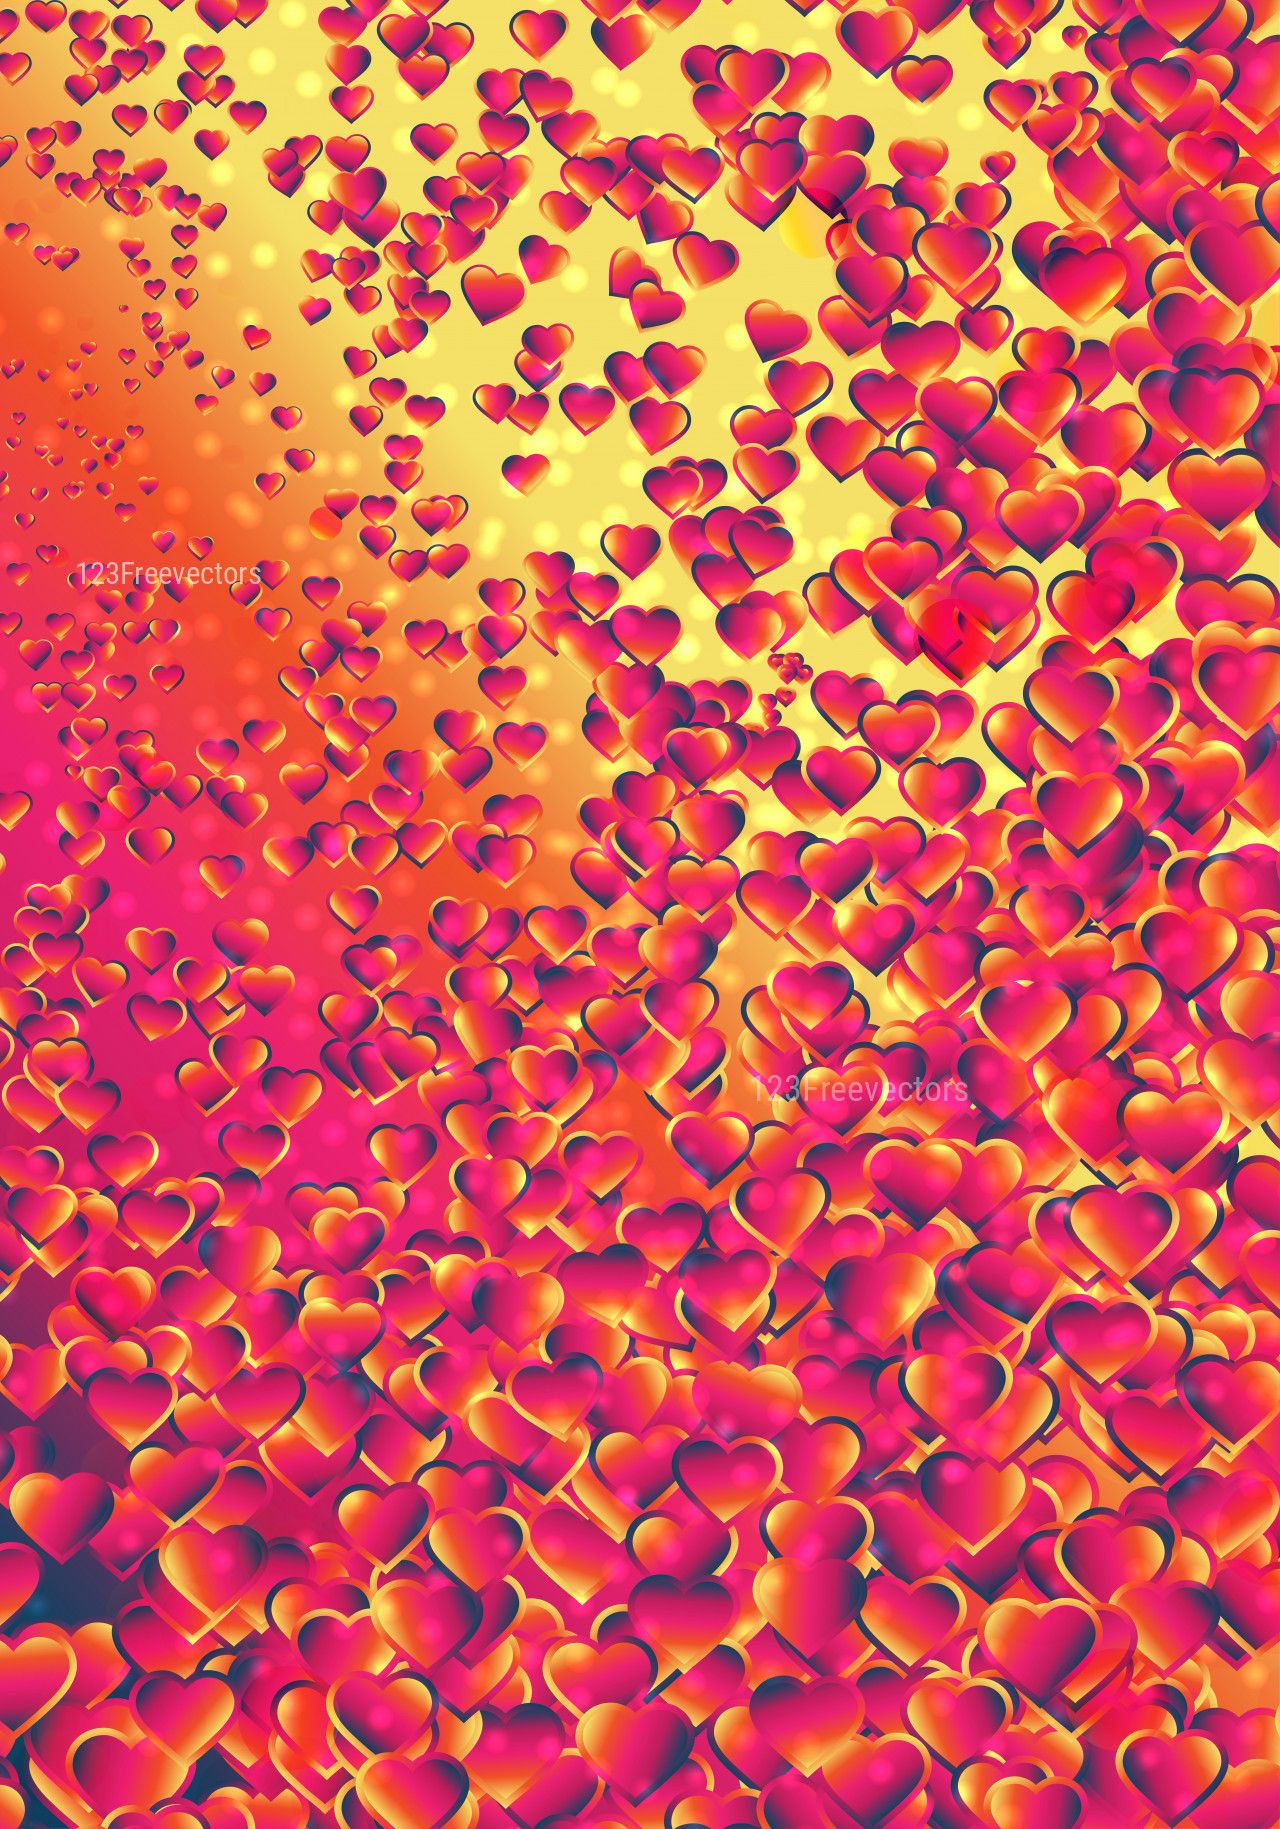 Pink Red and Yellow Heart Wallpaper Background Image